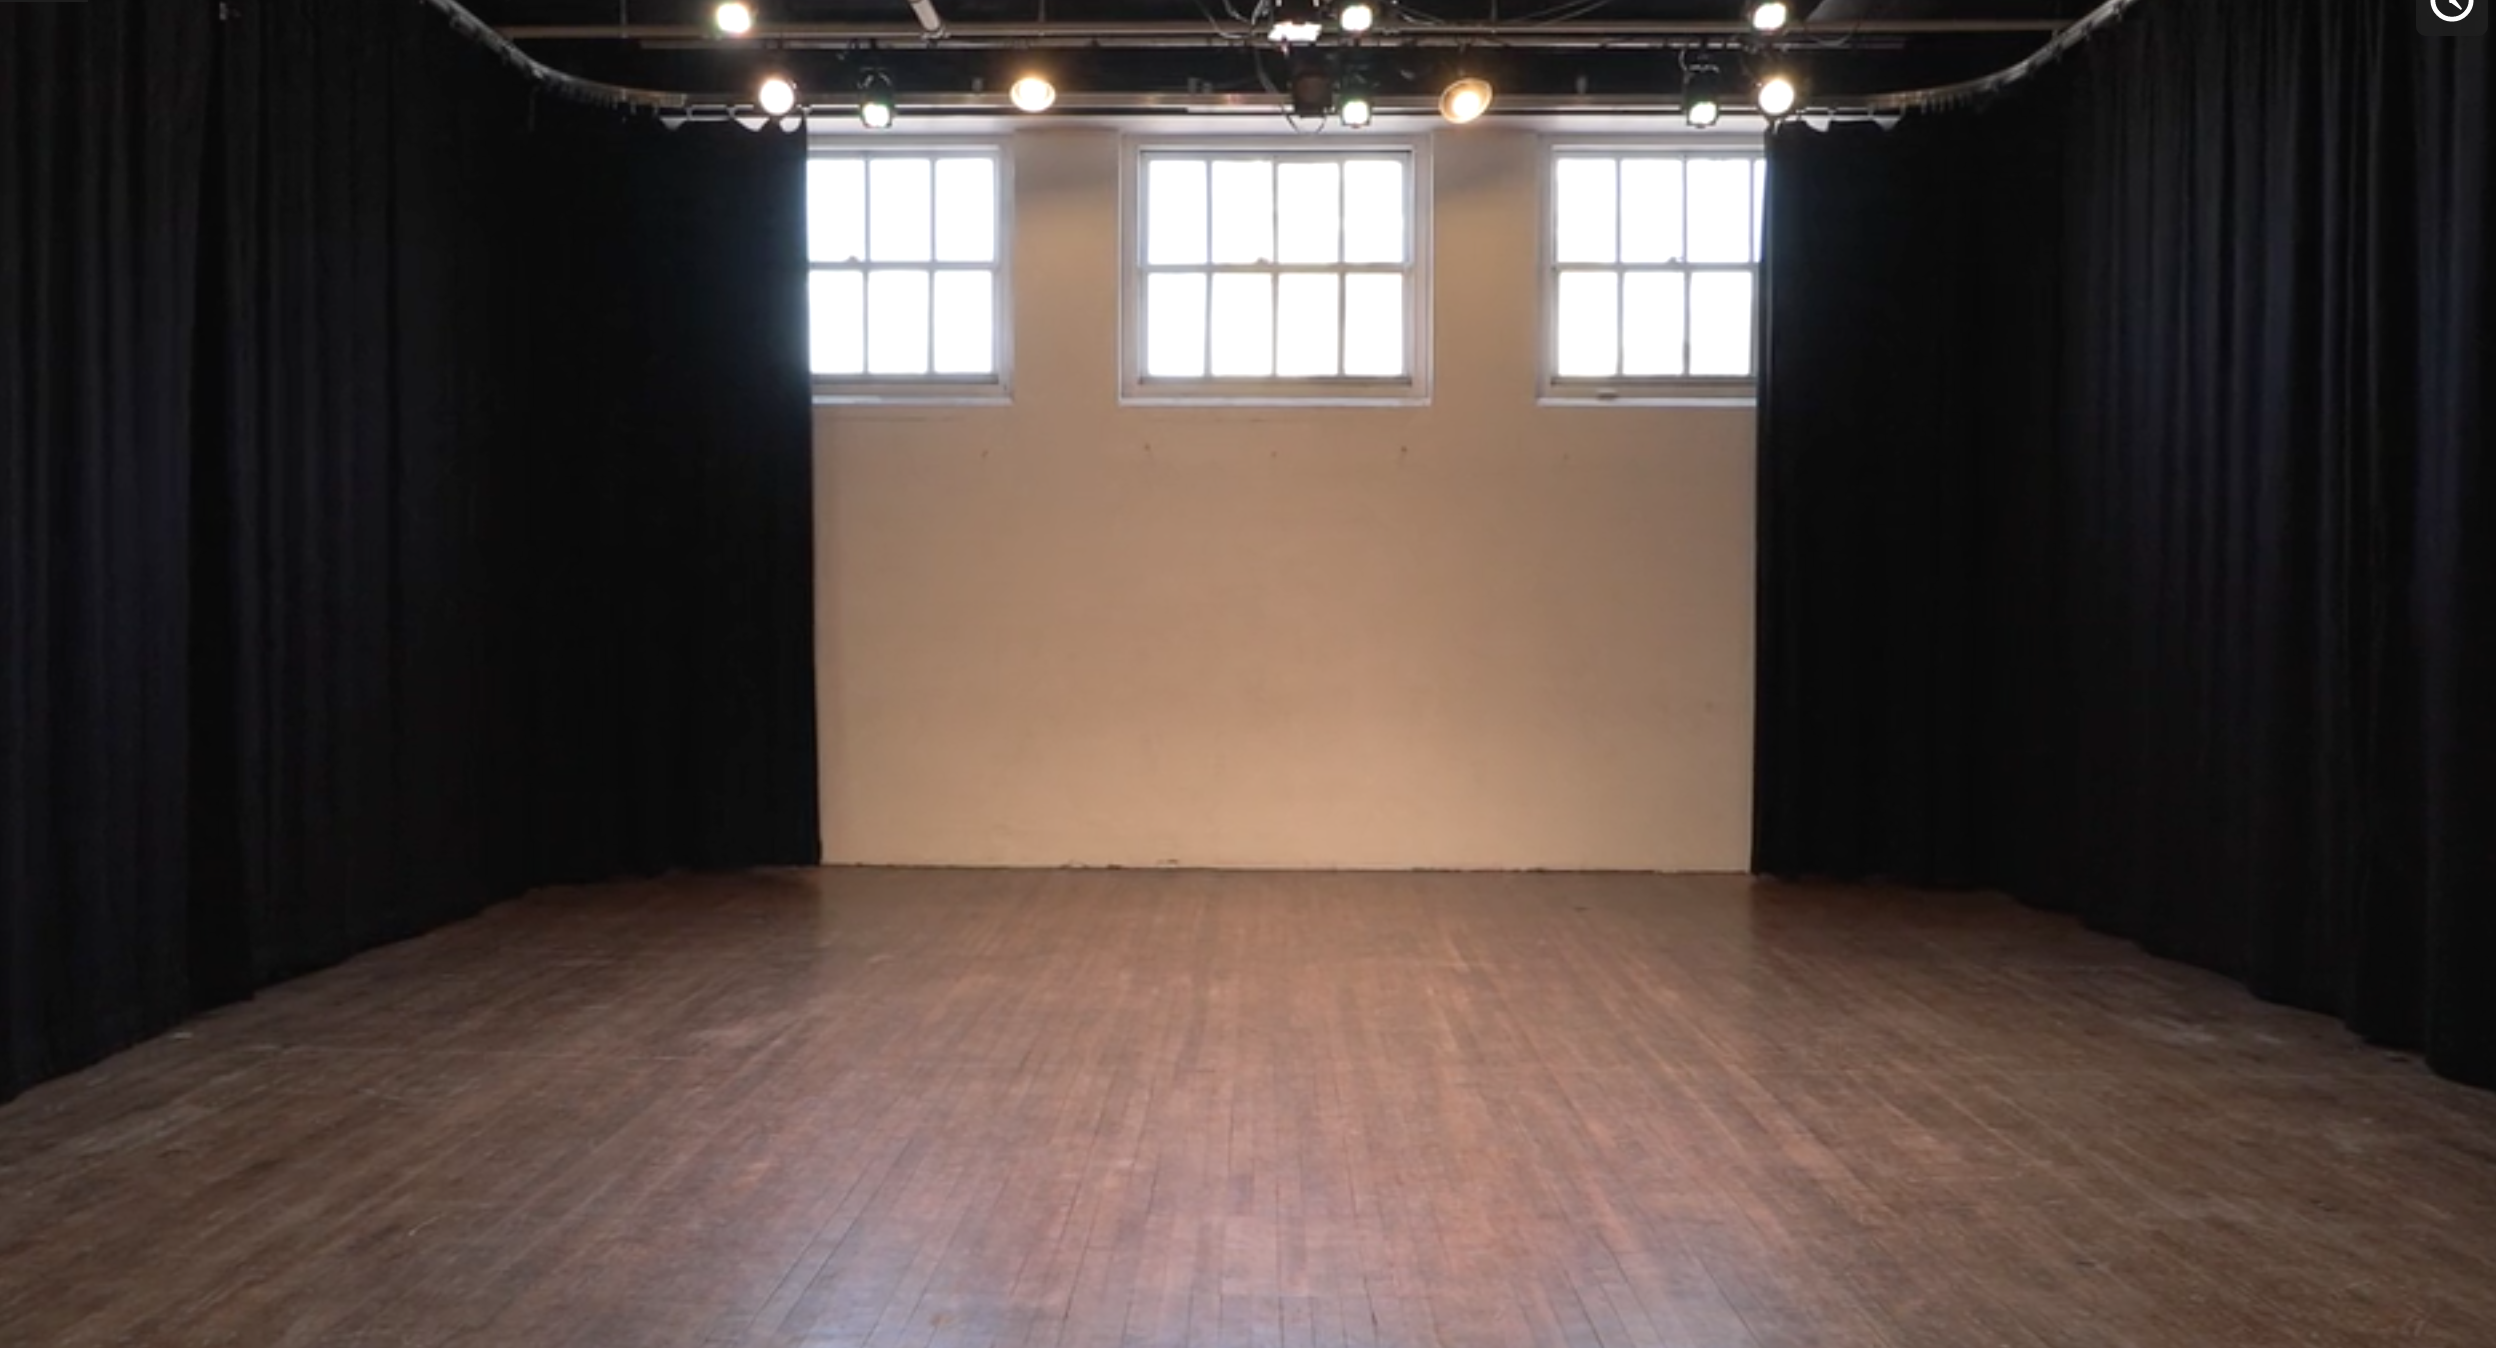 An image of the stage space in Studio 210